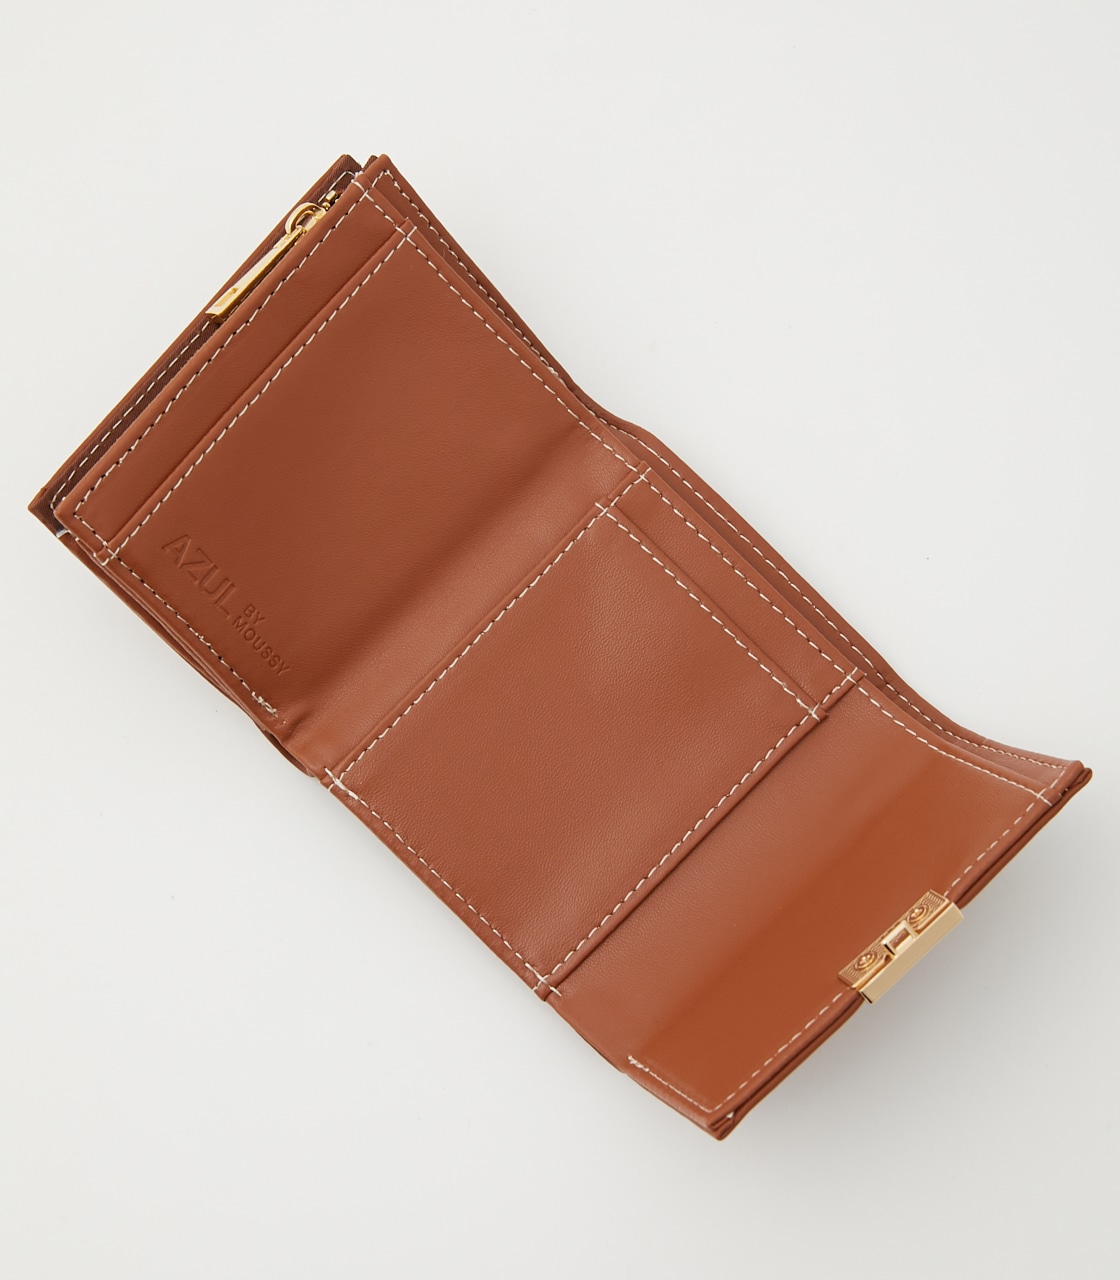 COLOR STITCHING WALLET/カラースティッチウォレット 詳細画像 BRN 5